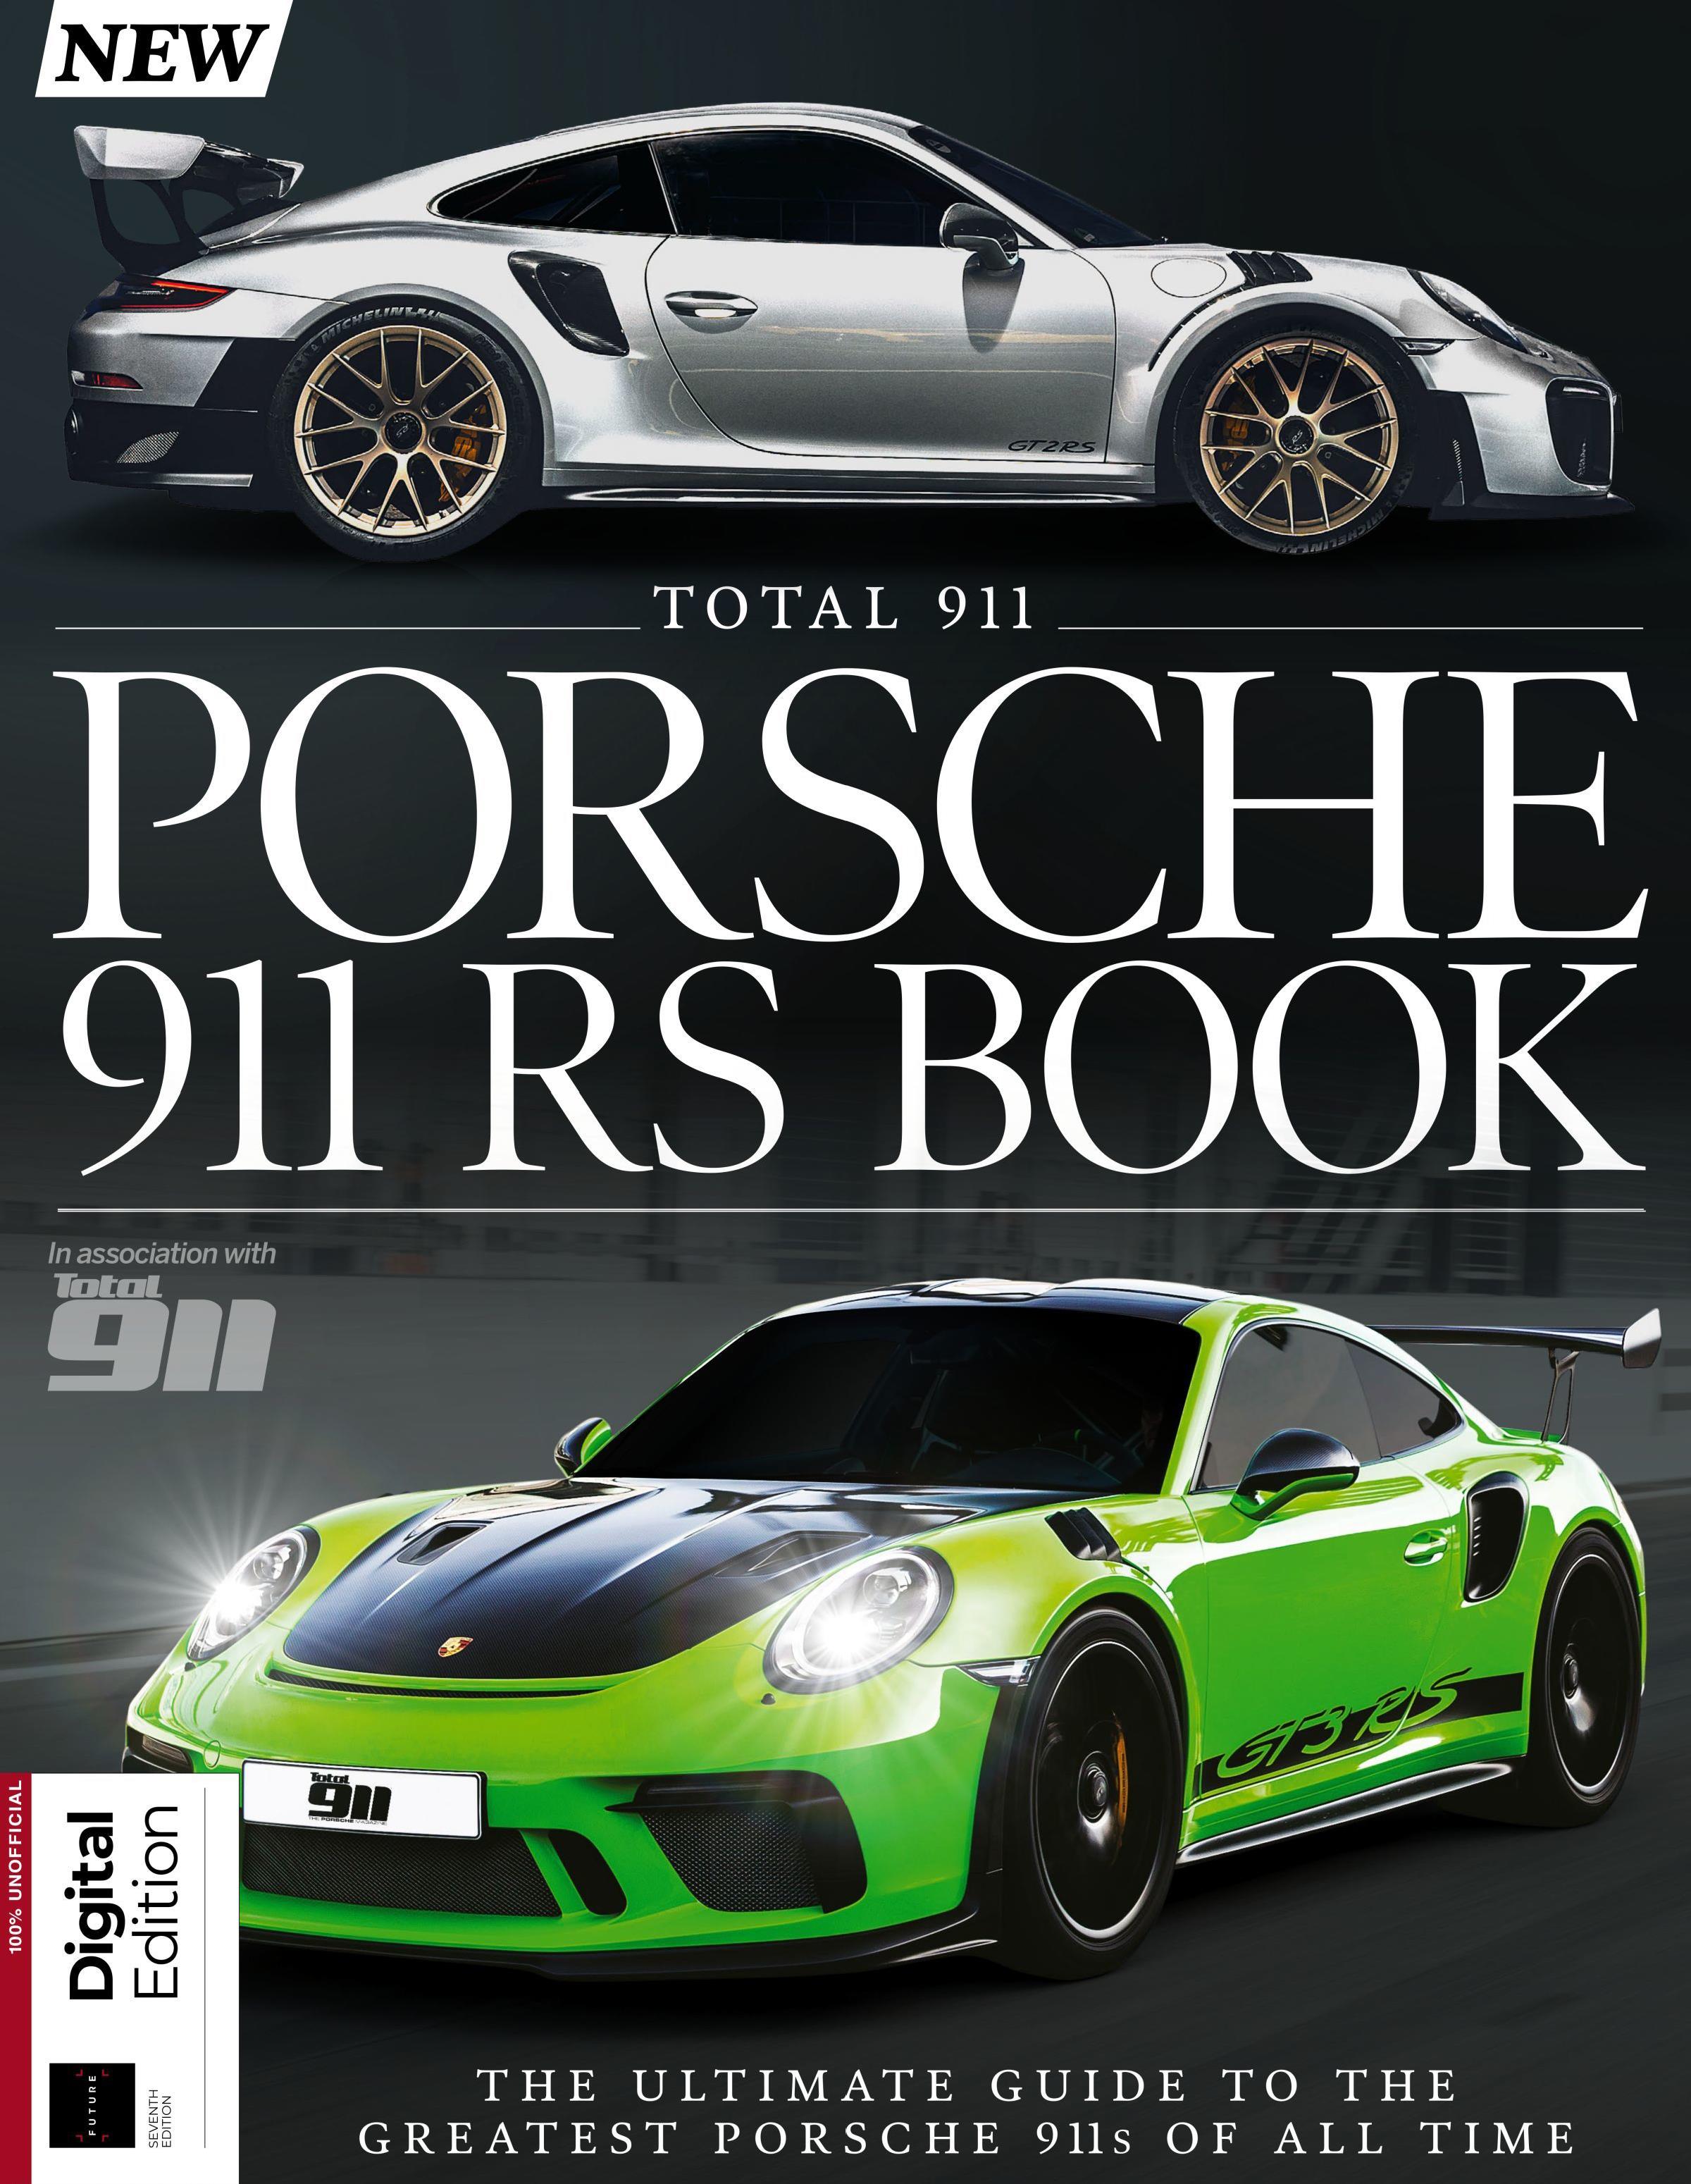 Журнал Porsche 911 RS Book 7th Edition.(from the publishers of Total 911)